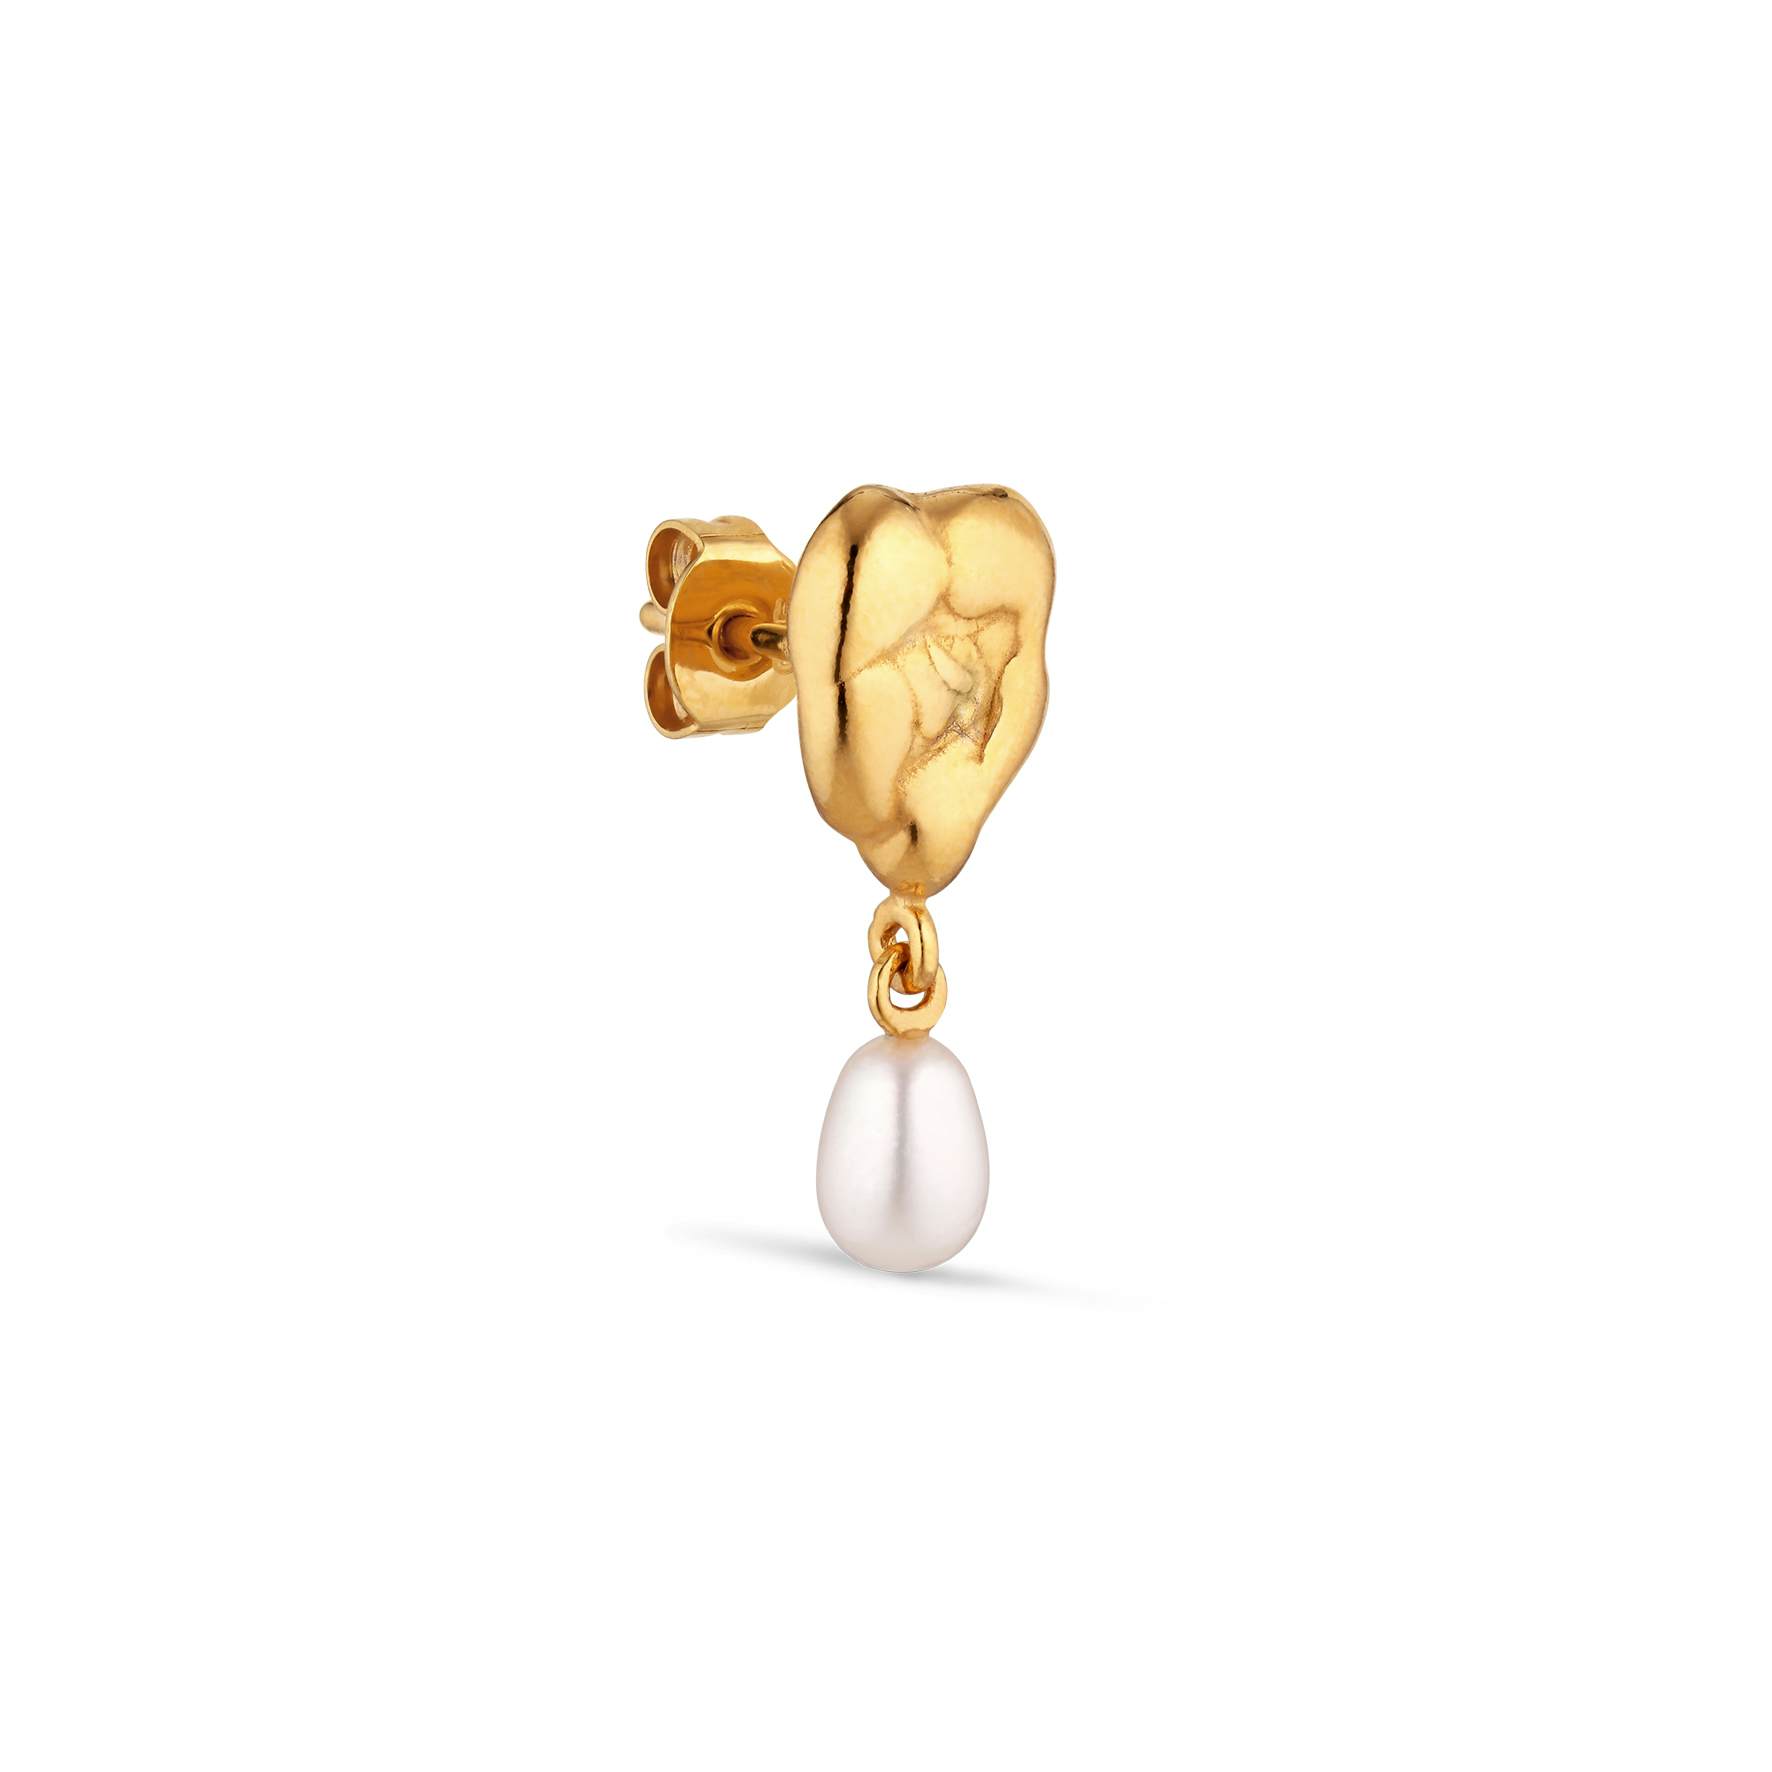 Drippy Earstud With Pearl Pendant from Jane Kønig in Goldplated-Silver Sterling 925